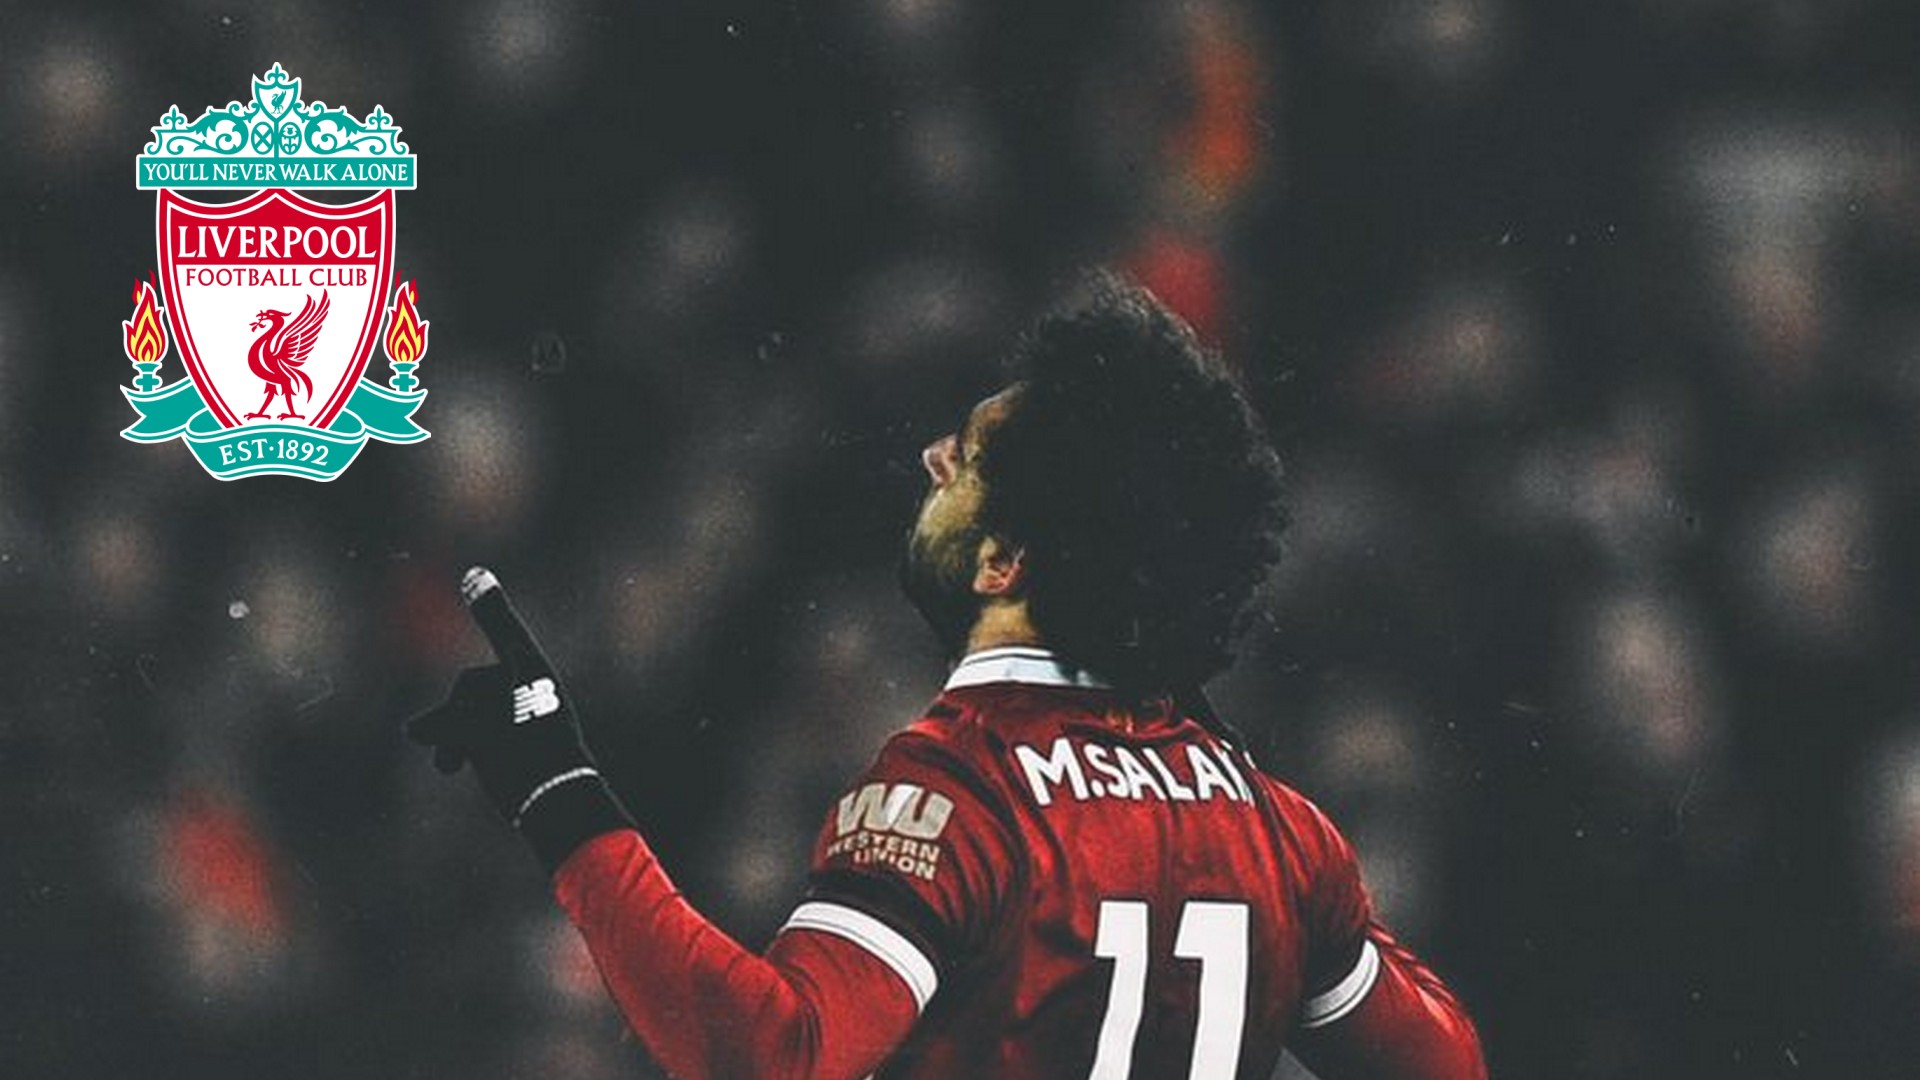 Best Mohamed Salah Wallpaper HD With Resolution 1920X1080 pixel. You can make this wallpaper for your Desktop Computer Backgrounds, Mac Wallpapers, Android Lock screen or iPhone Screensavers